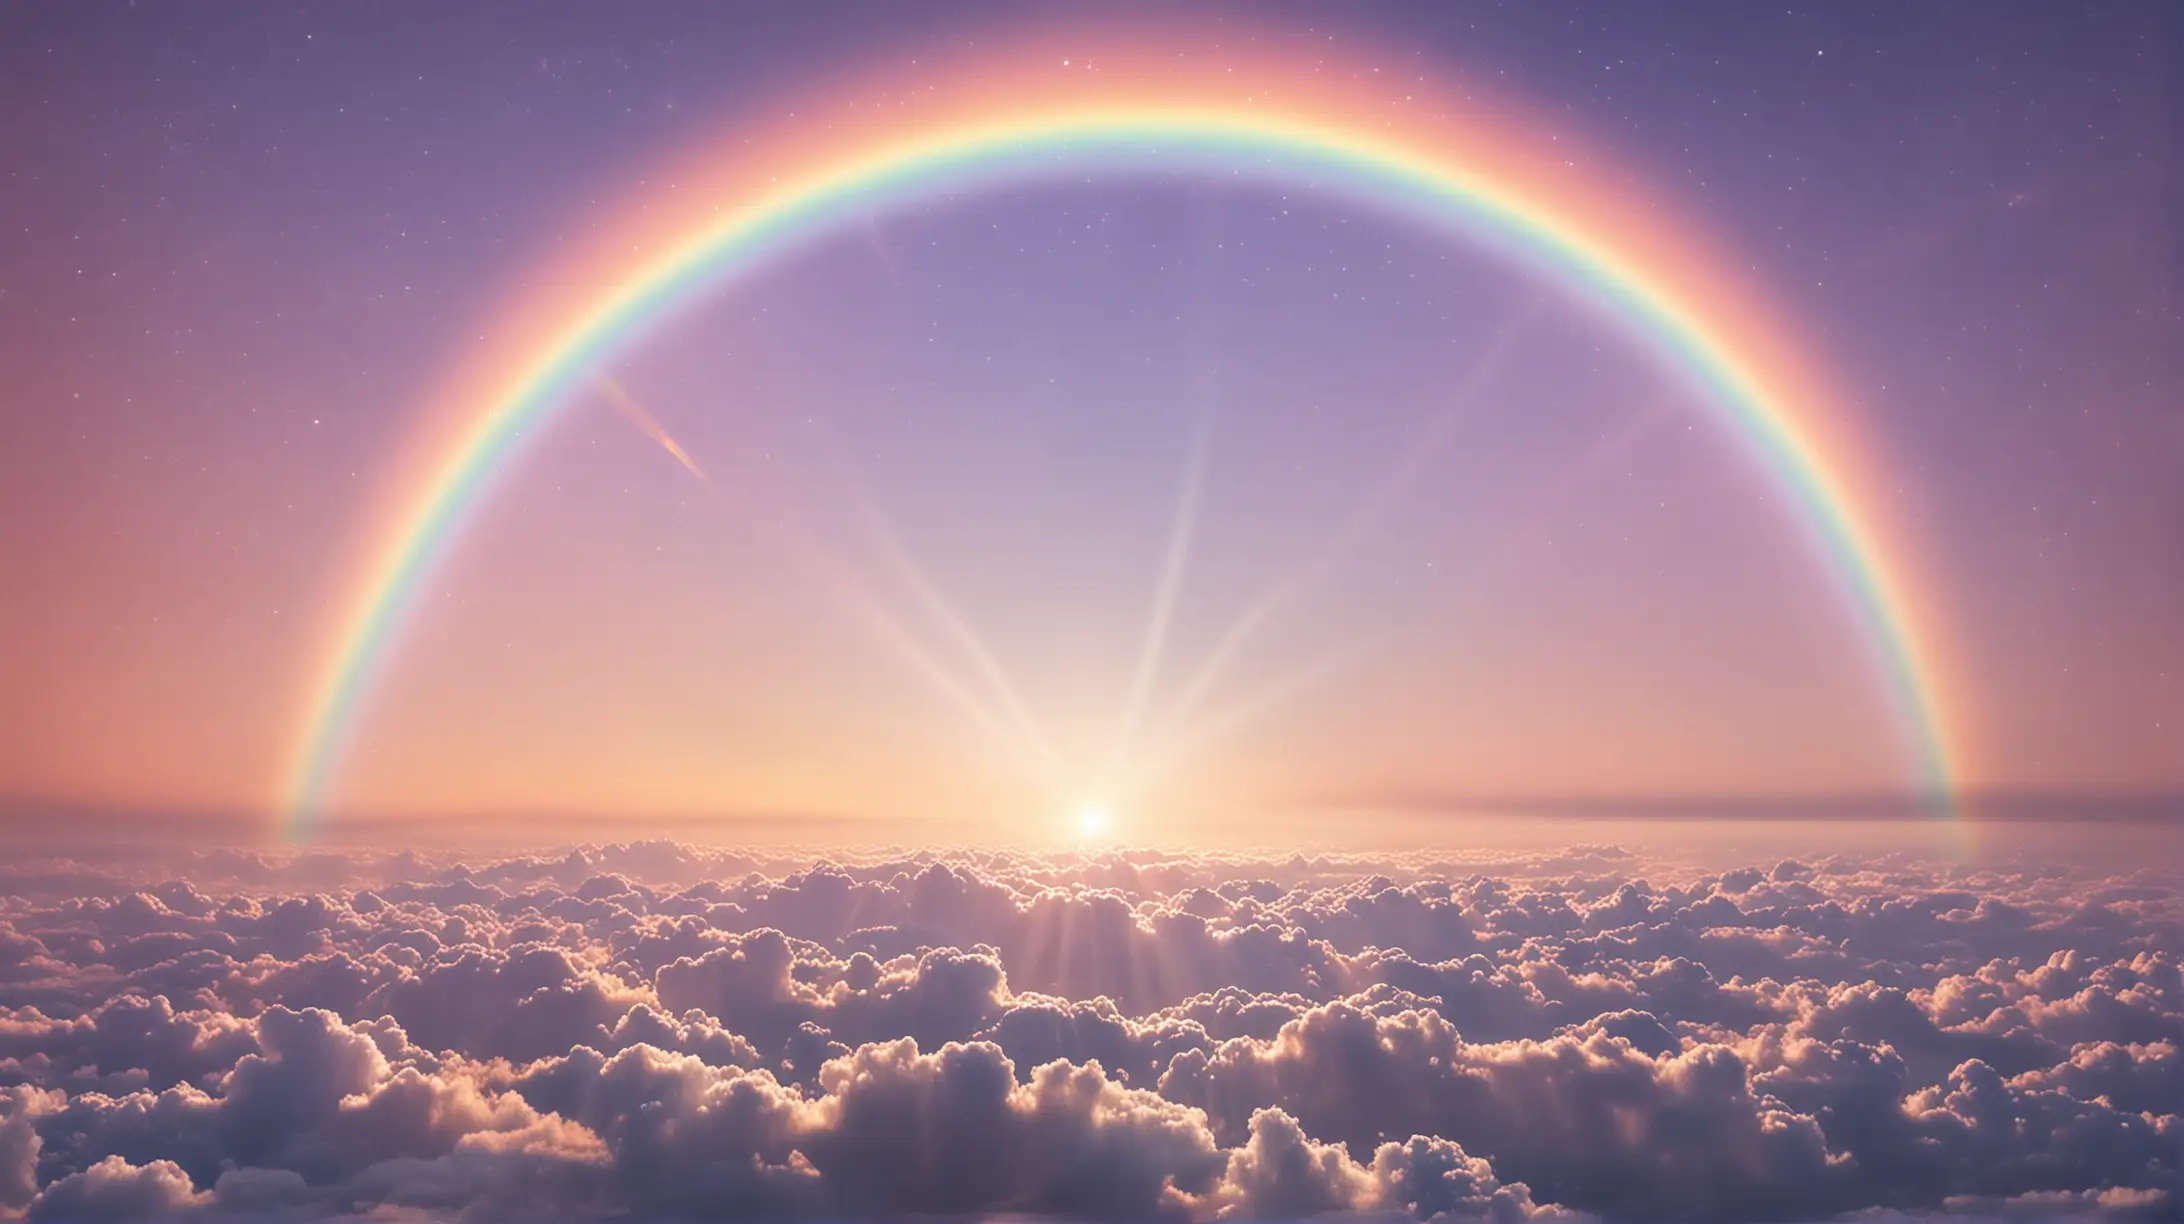 Ethereal Pastel Sky with Rainbow Beam A Magical Journey from Sun to Earth